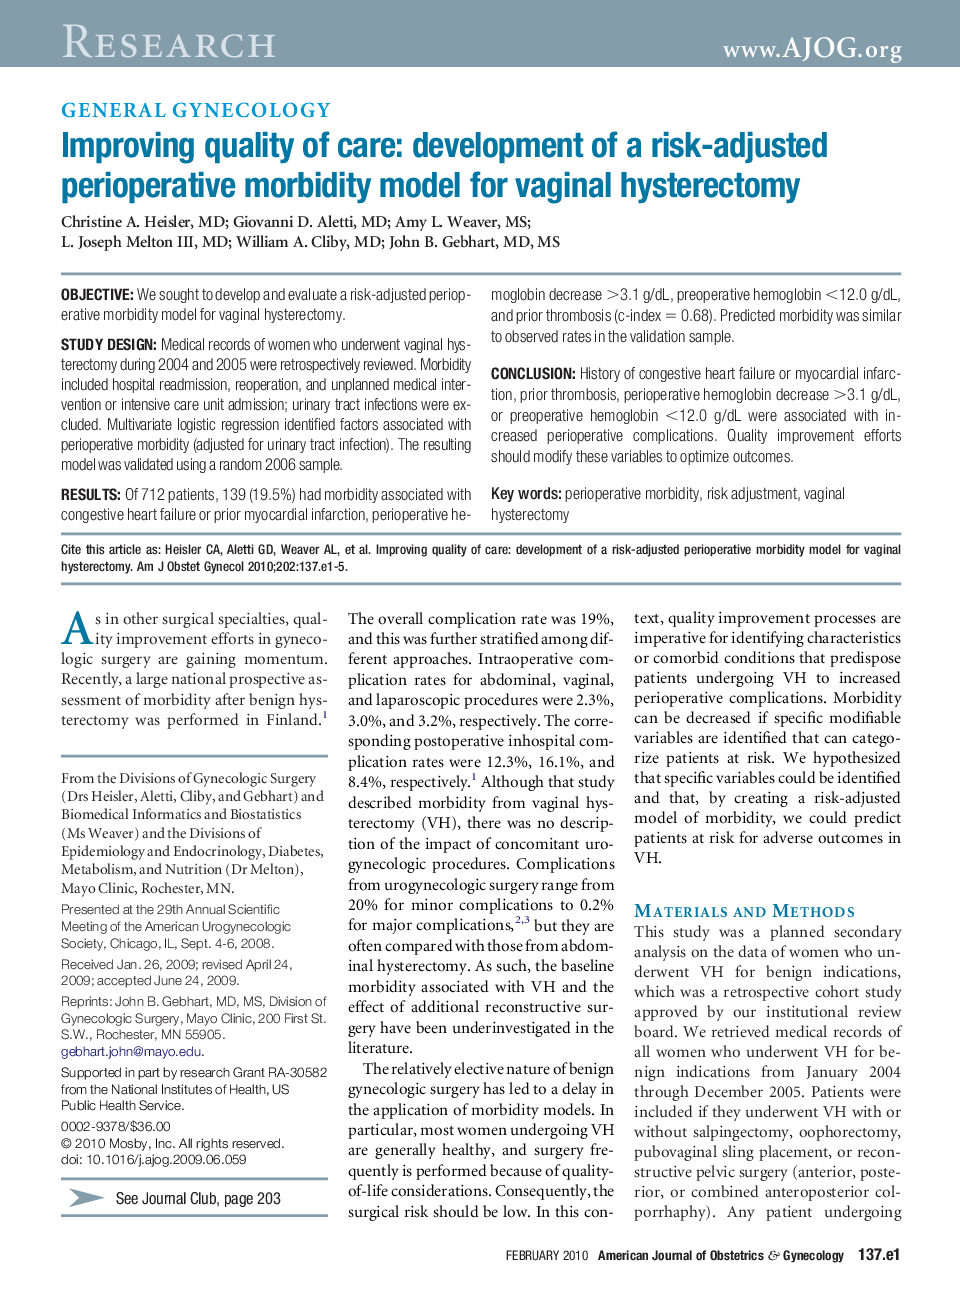 Improving quality of care: development of a risk-adjusted perioperative morbidity model for vaginal hysterectomy